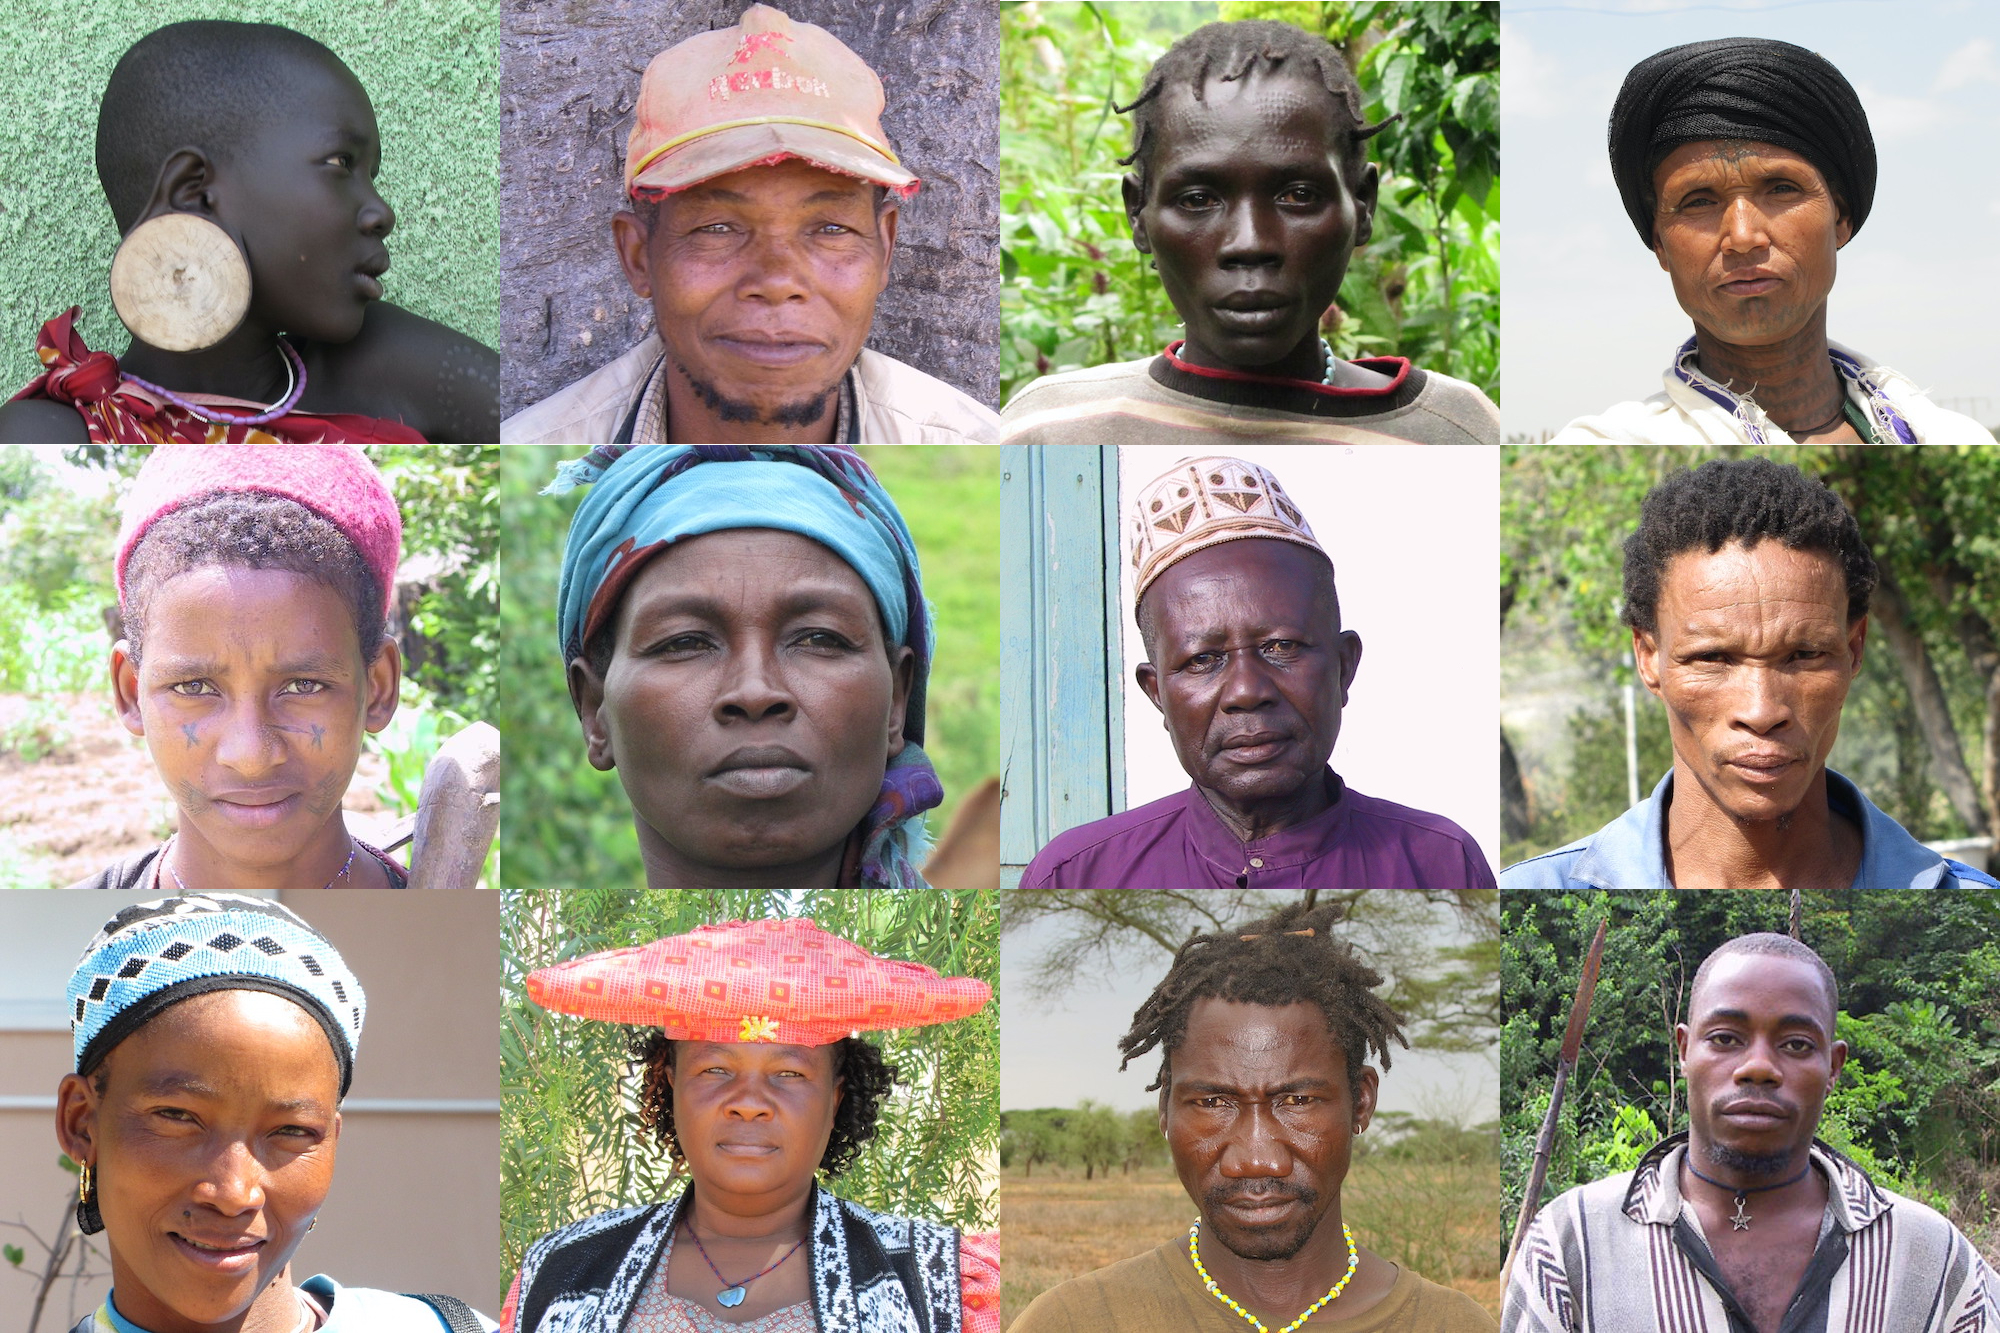 12 images of individuals from different indigenous groups in Africa